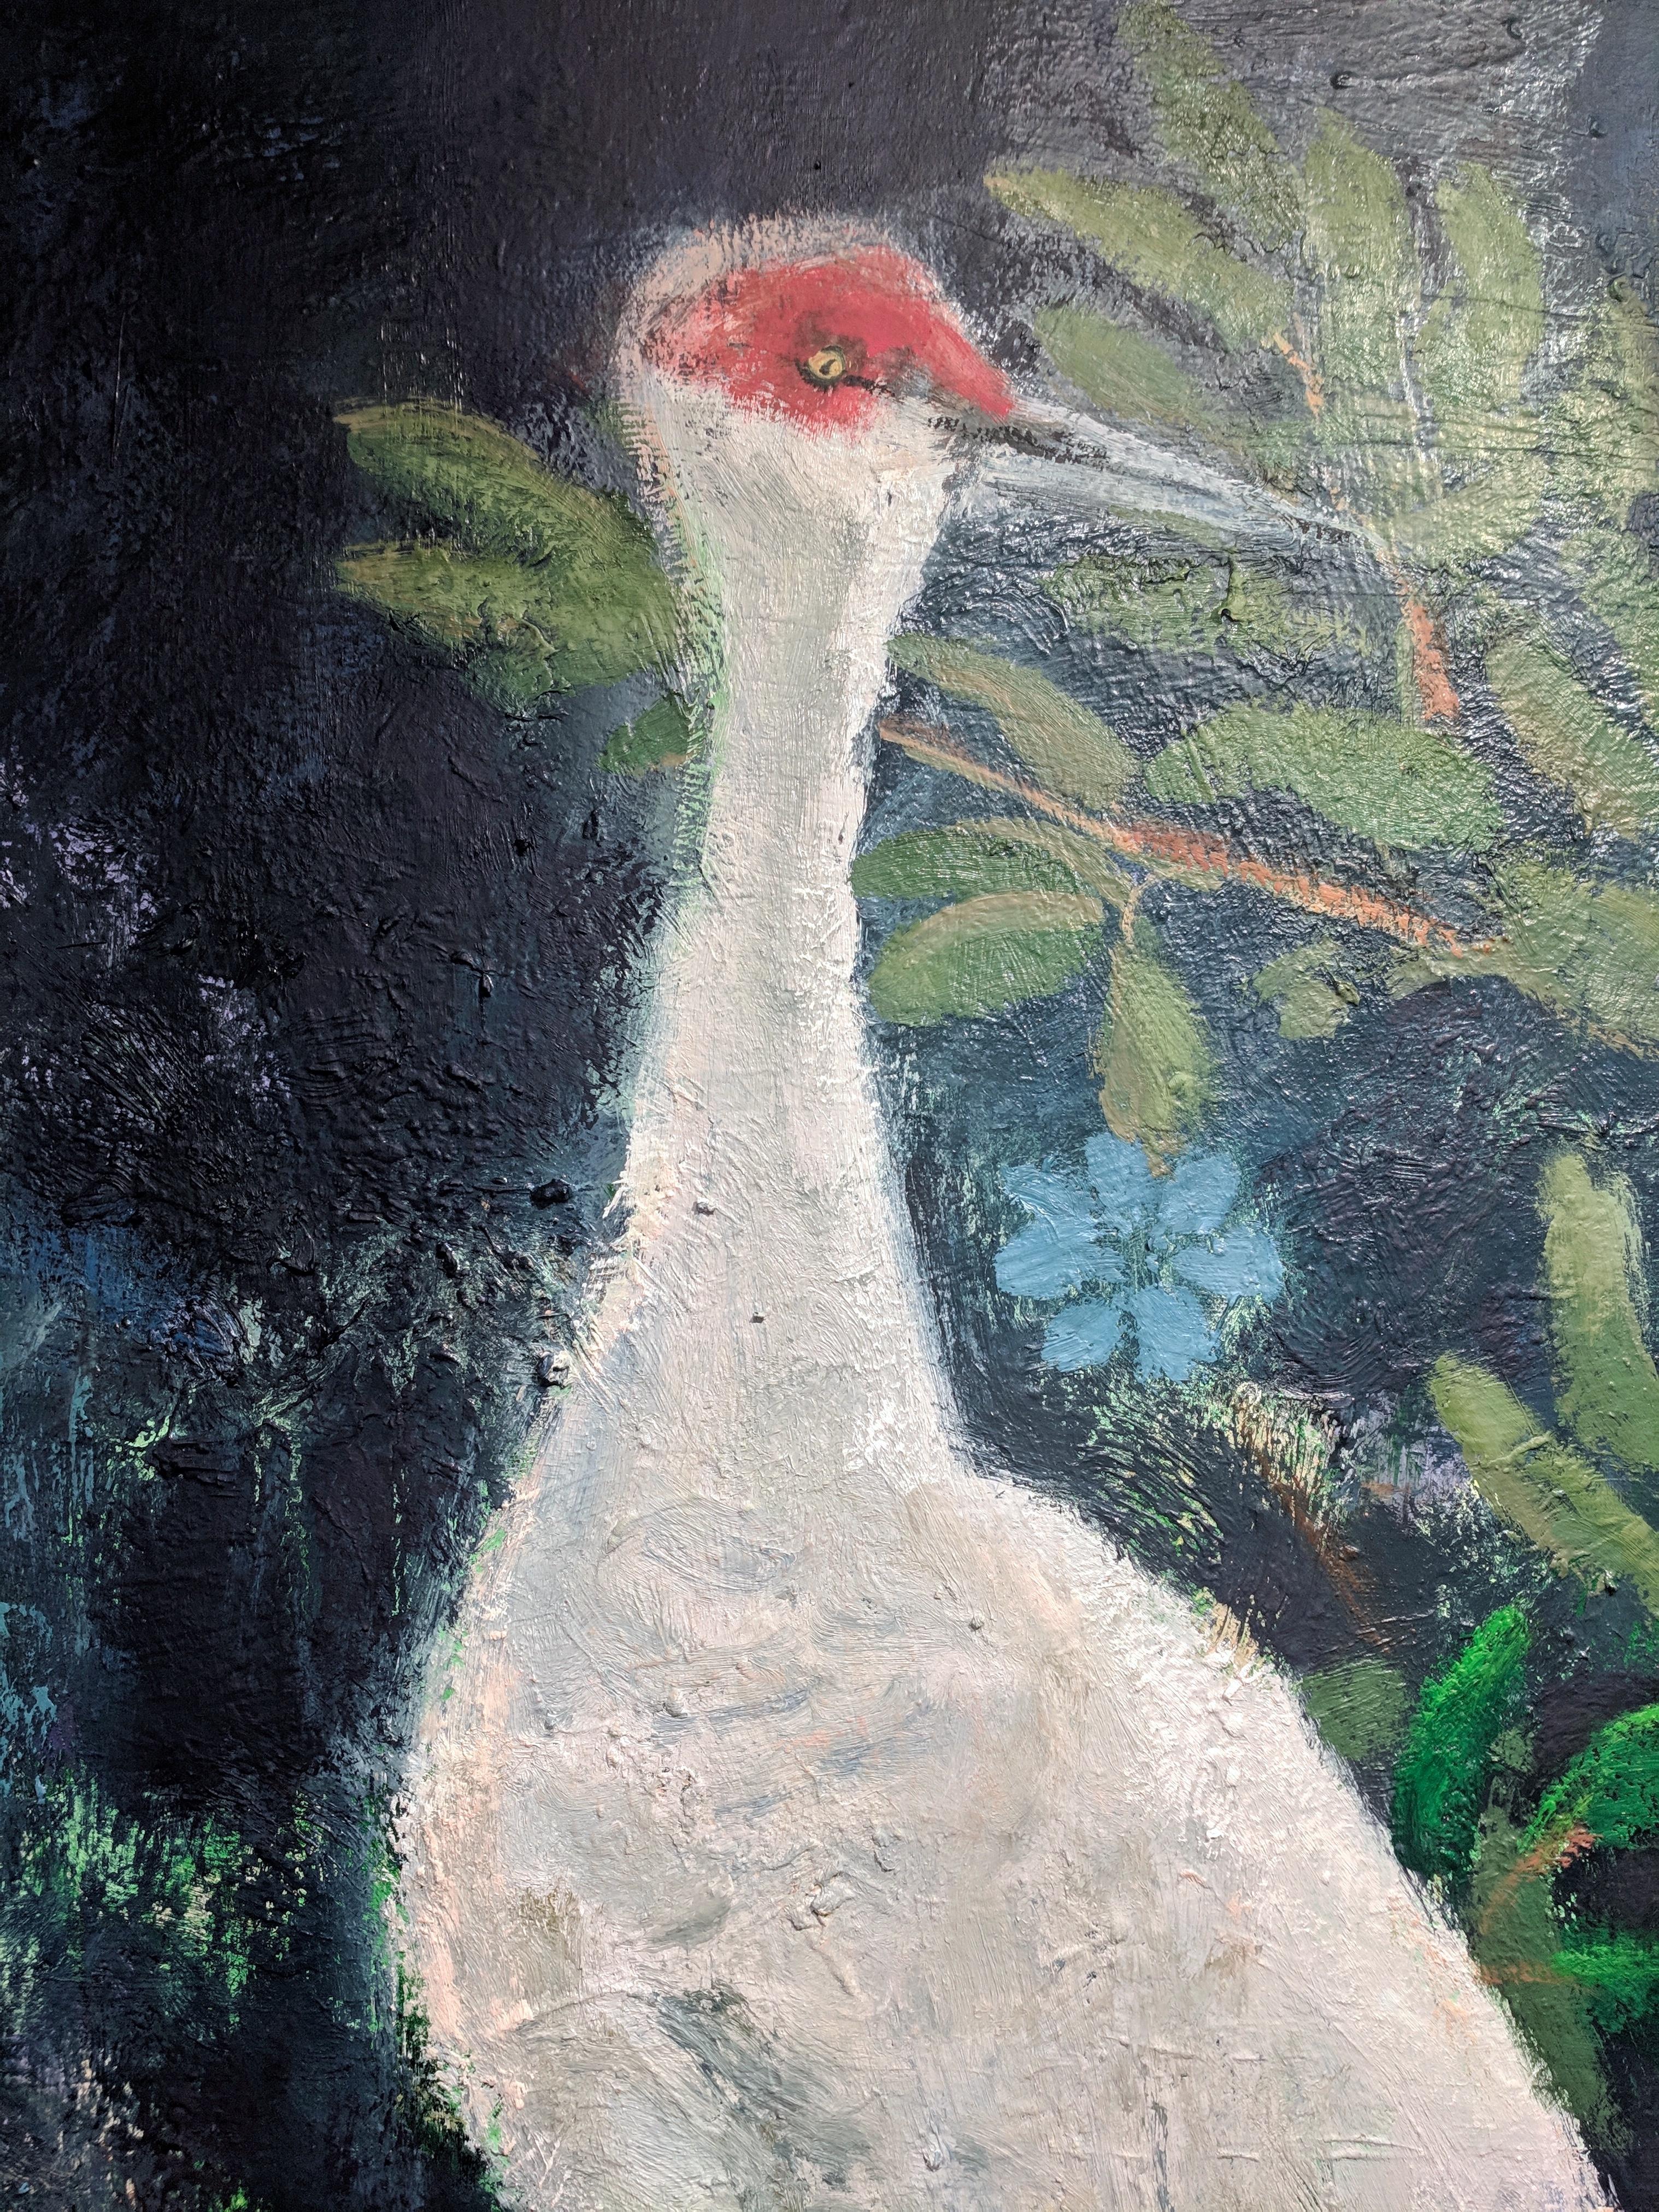 A tall white and red bird is dramatic against a dark navy blue background, with colorful flowers and green leaves in this peaceful nighttime scene.

Melanie Parke filters and reconstructs pastoral and bucolic still life settings that emerge from her